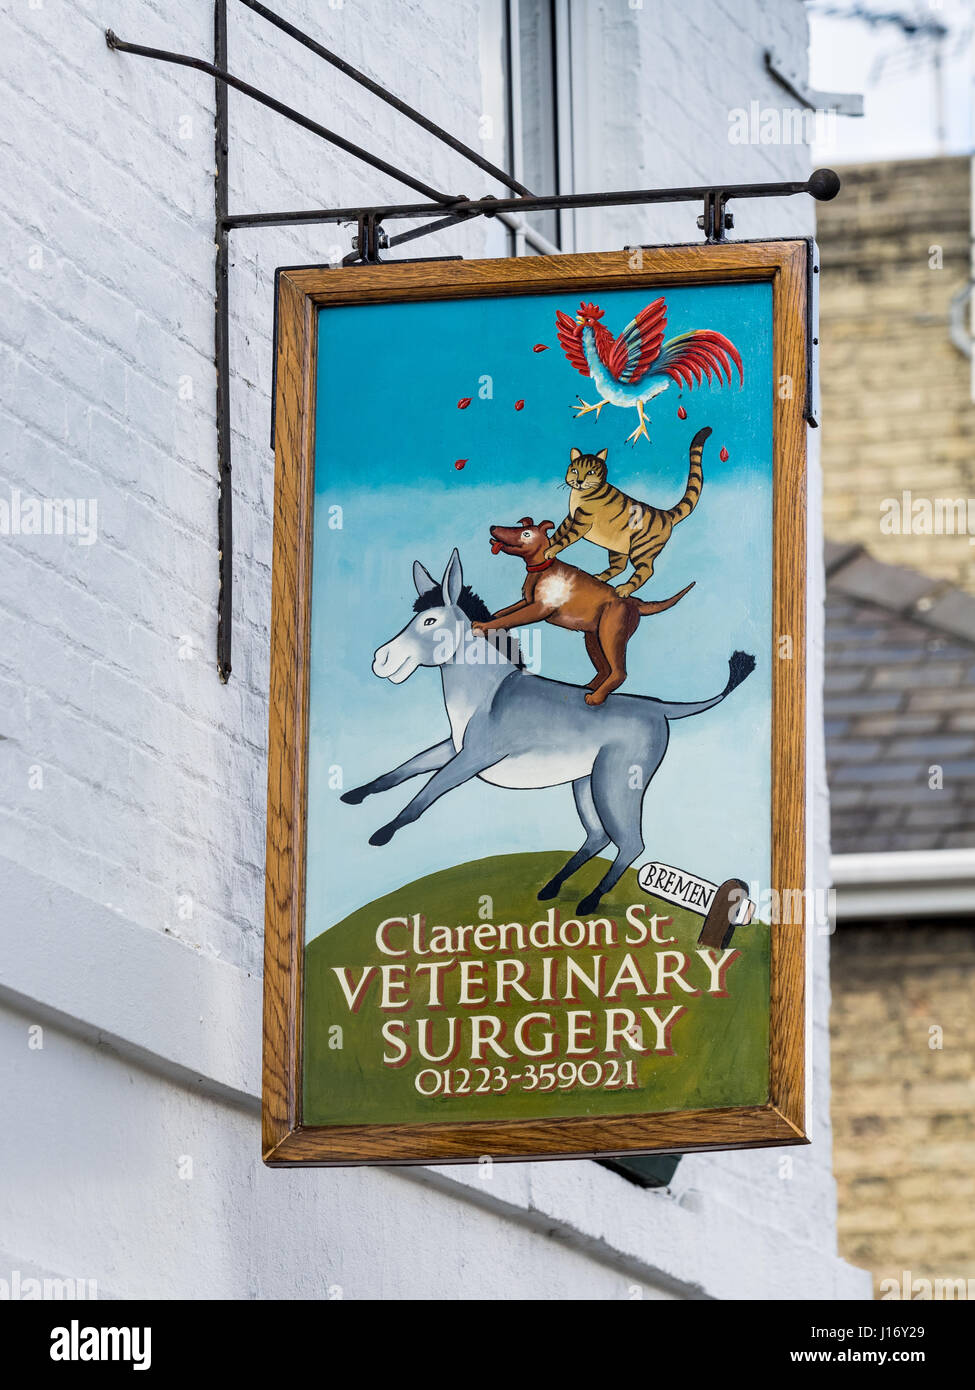 veterinary surgery sign in cambridge the illustration is based on J16Y29